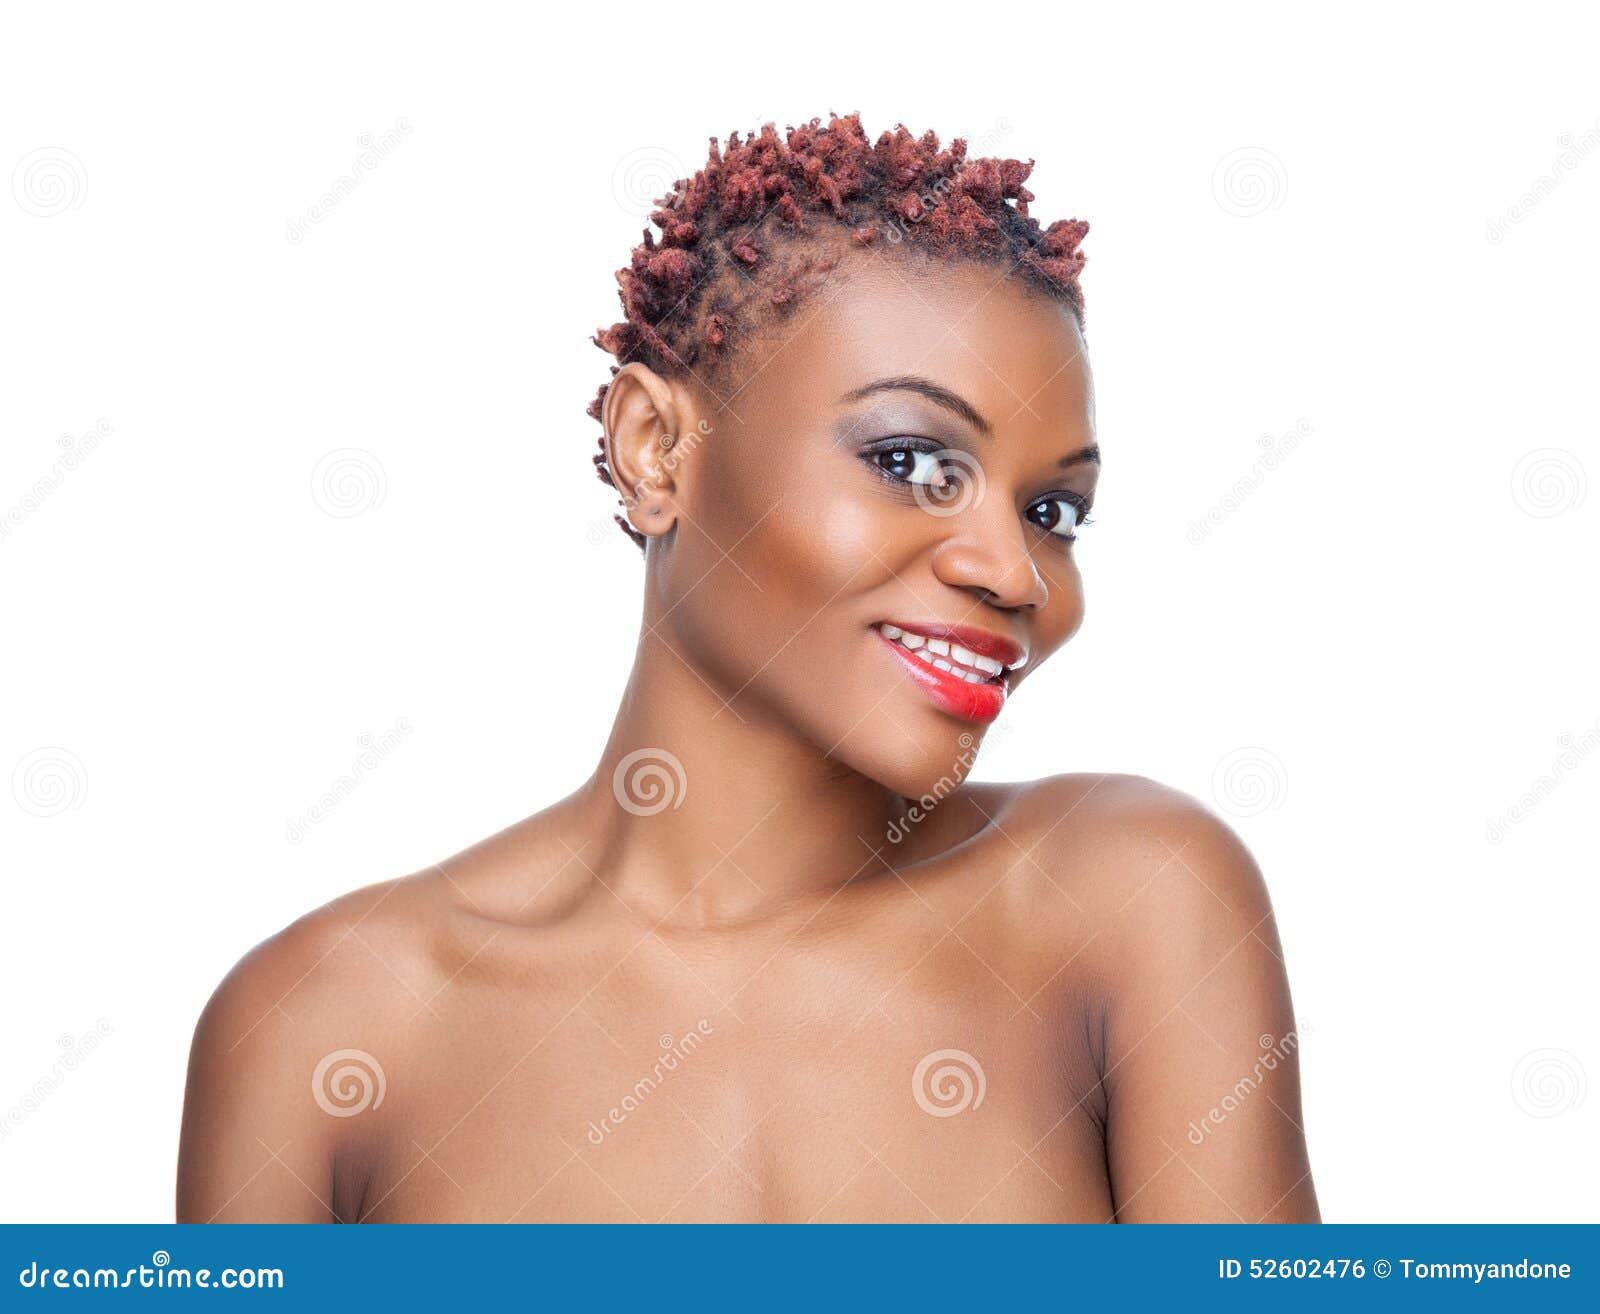 Black Beauty with Short Spiky Hair Stock Photo - Image of healthy,  complexion: 52602476